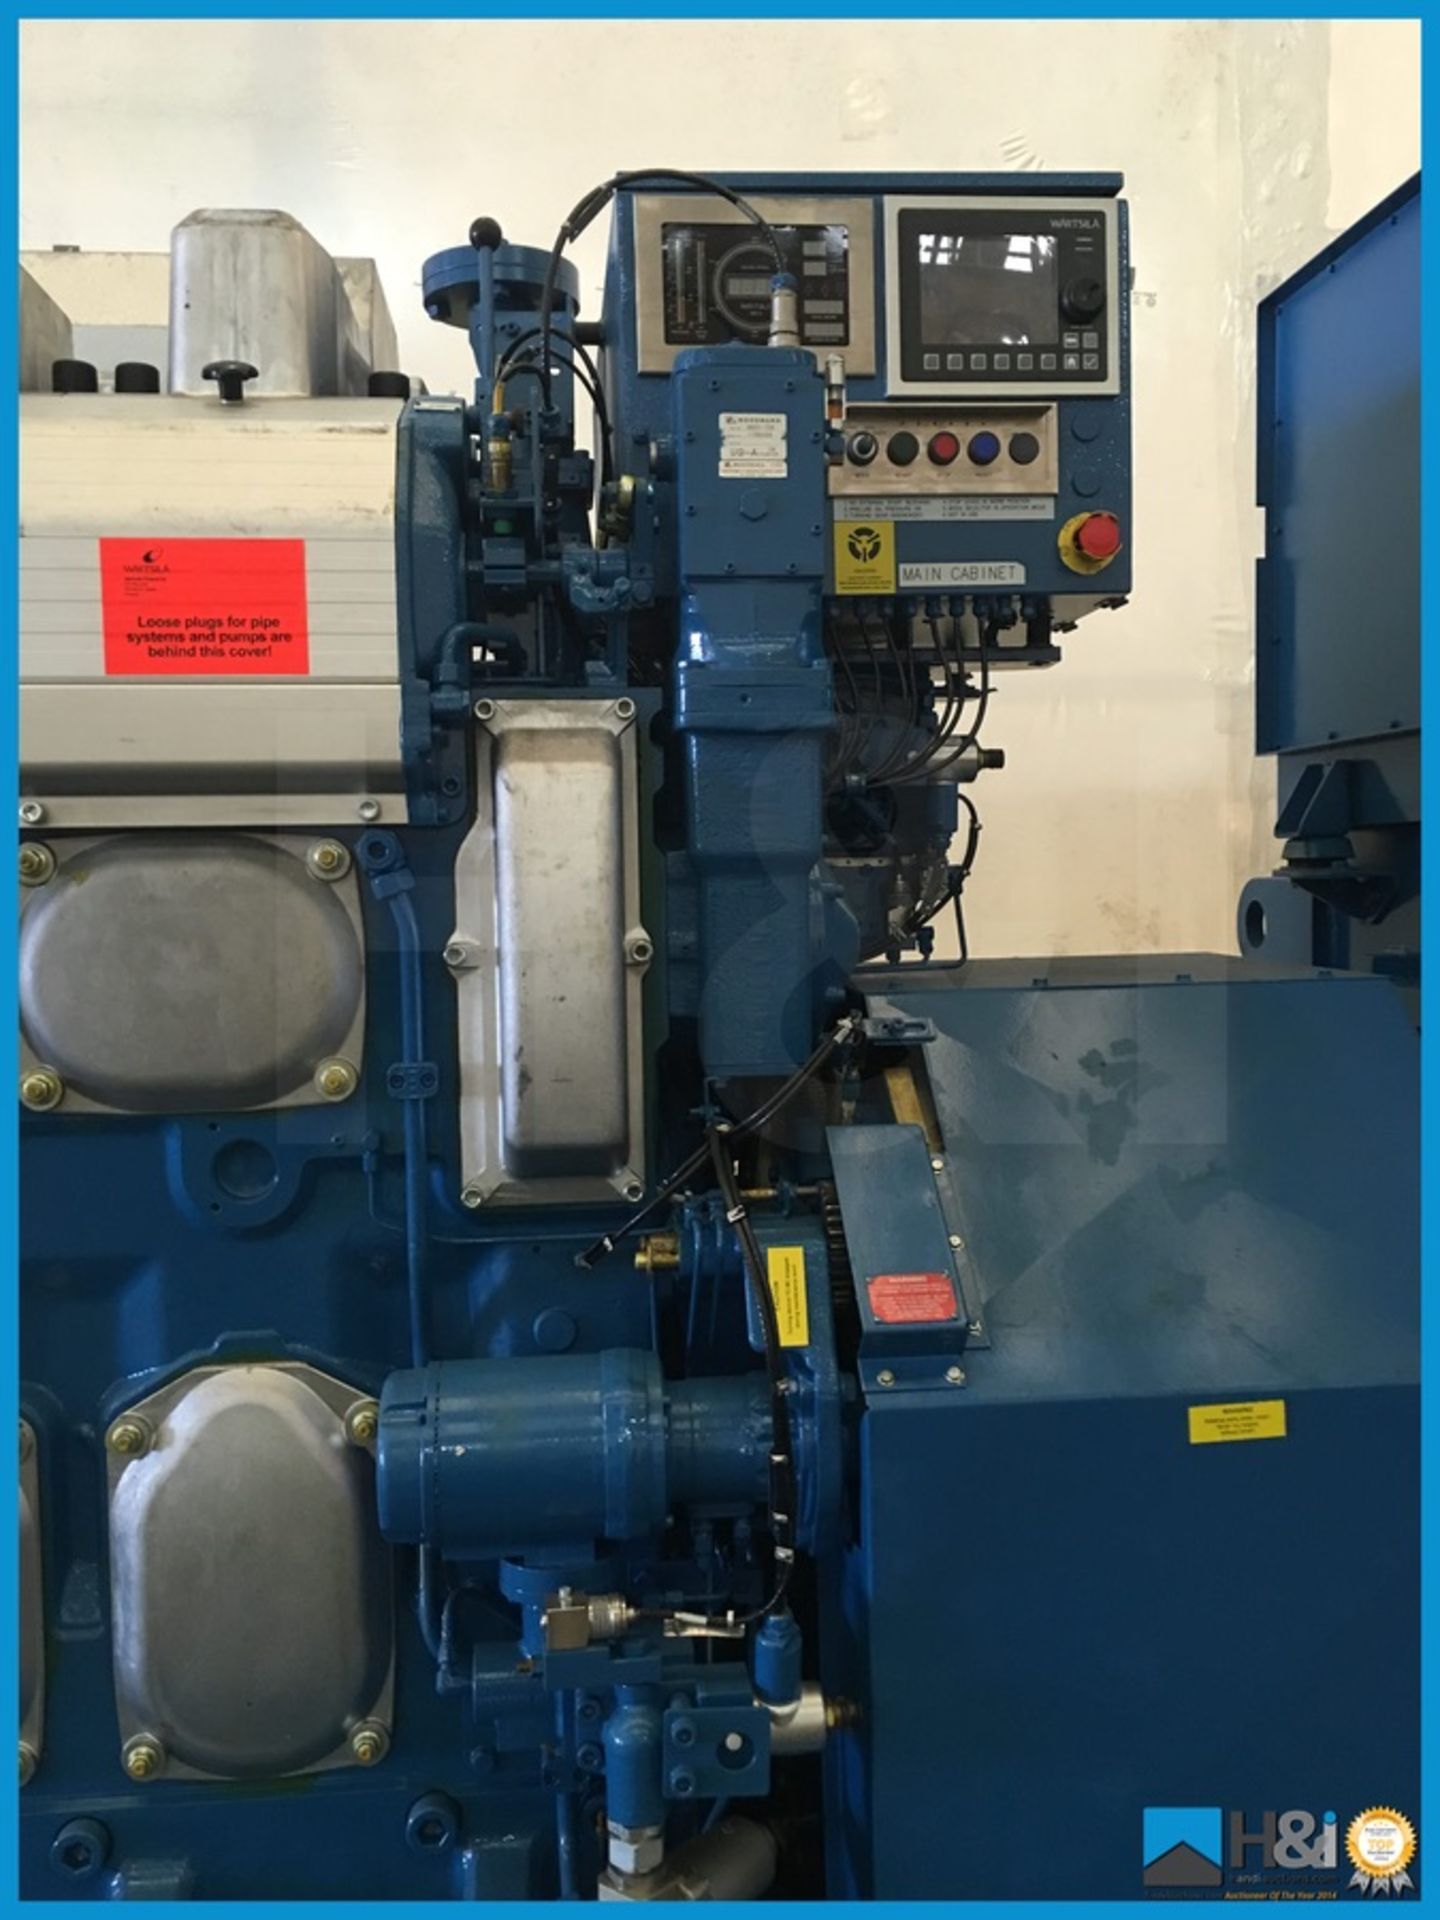 Unused Wartsila 8L20 high capacity diesel generator manufactured in 2013 for a large marine - Image 4 of 19